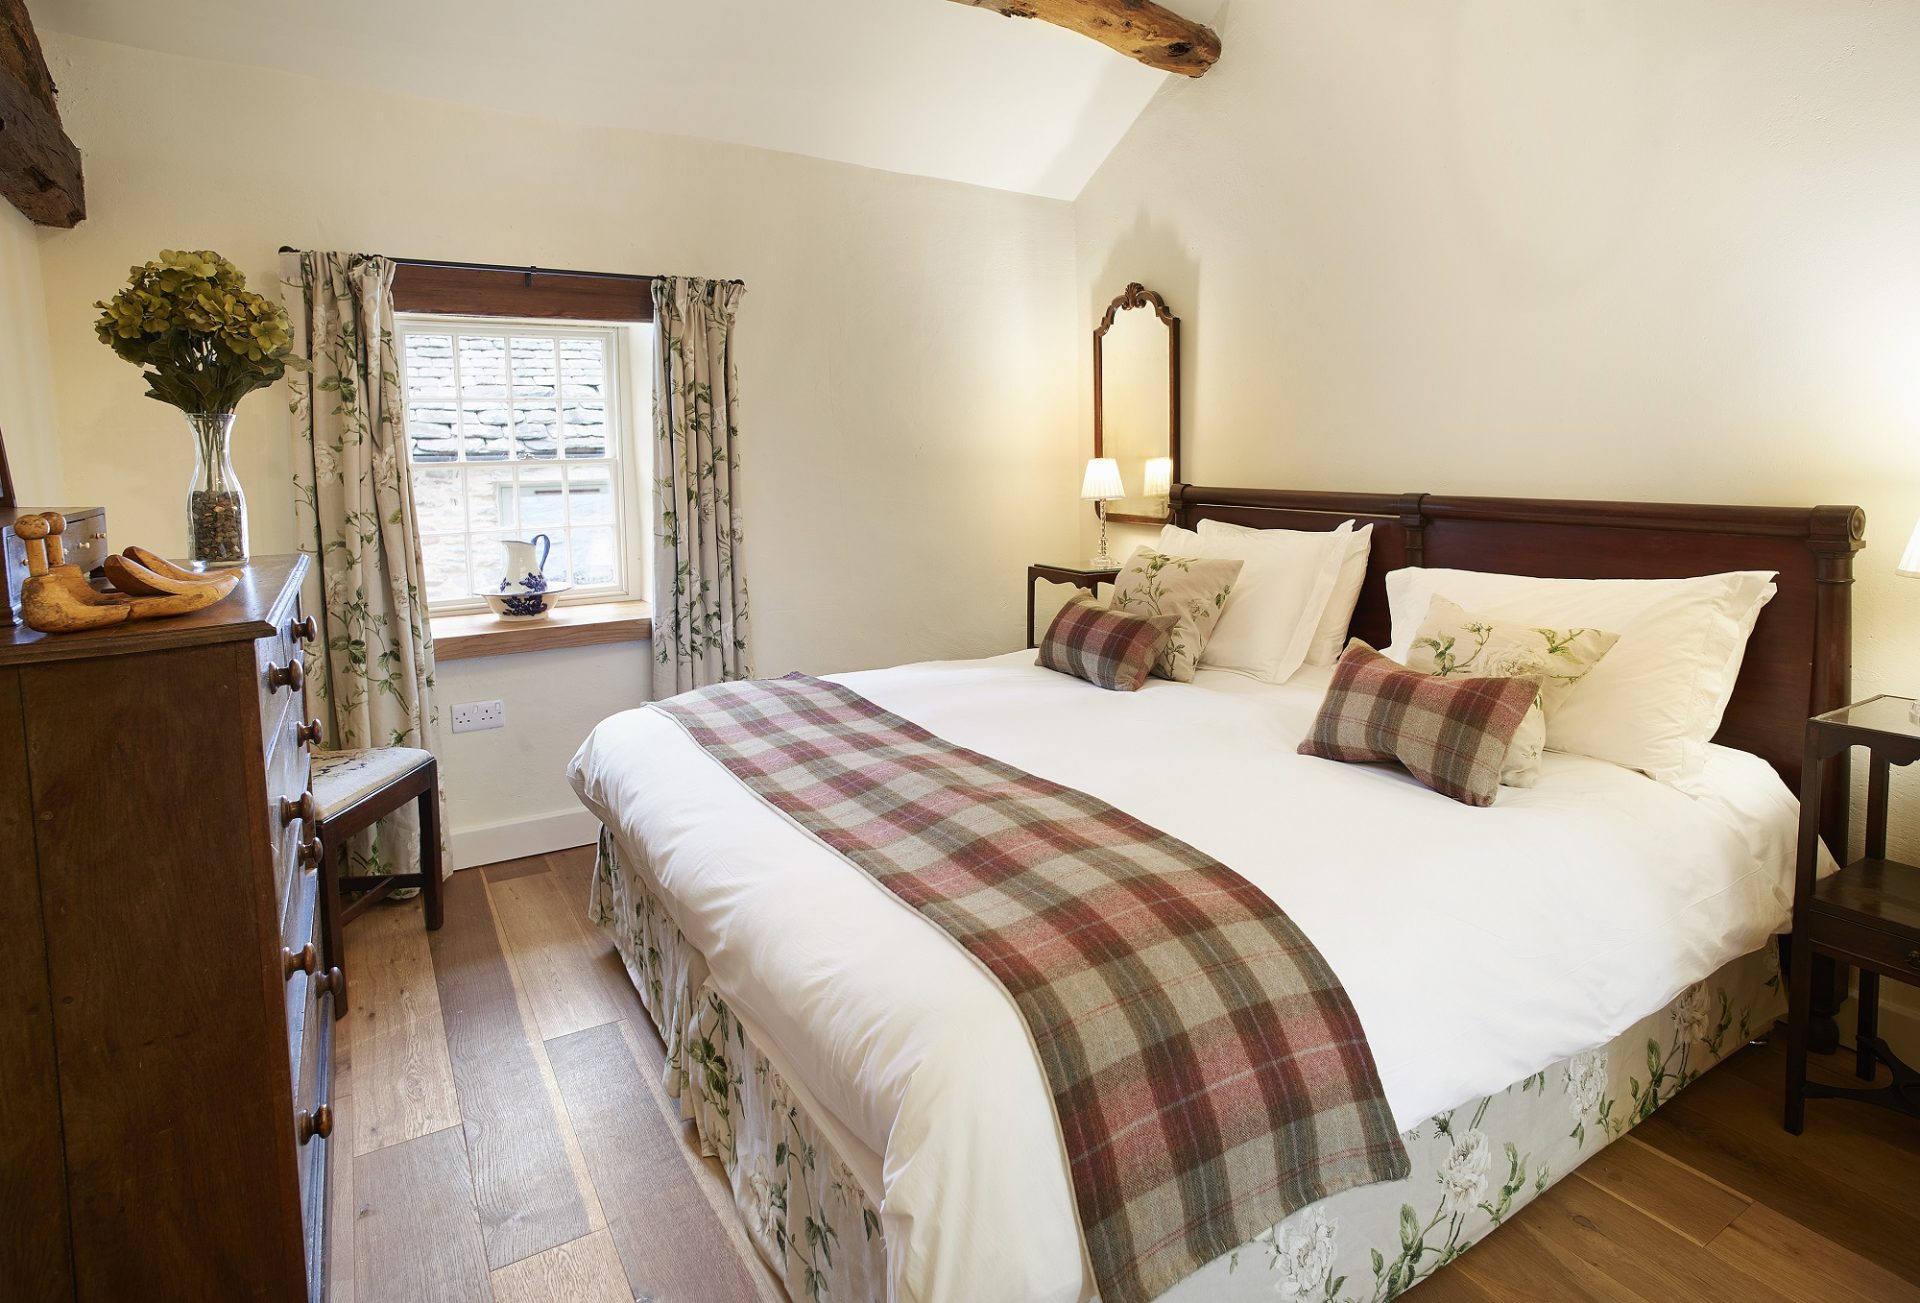 Hause Hall Farm Bannerdale Room ensuite on first floor can zip and link to two single beds